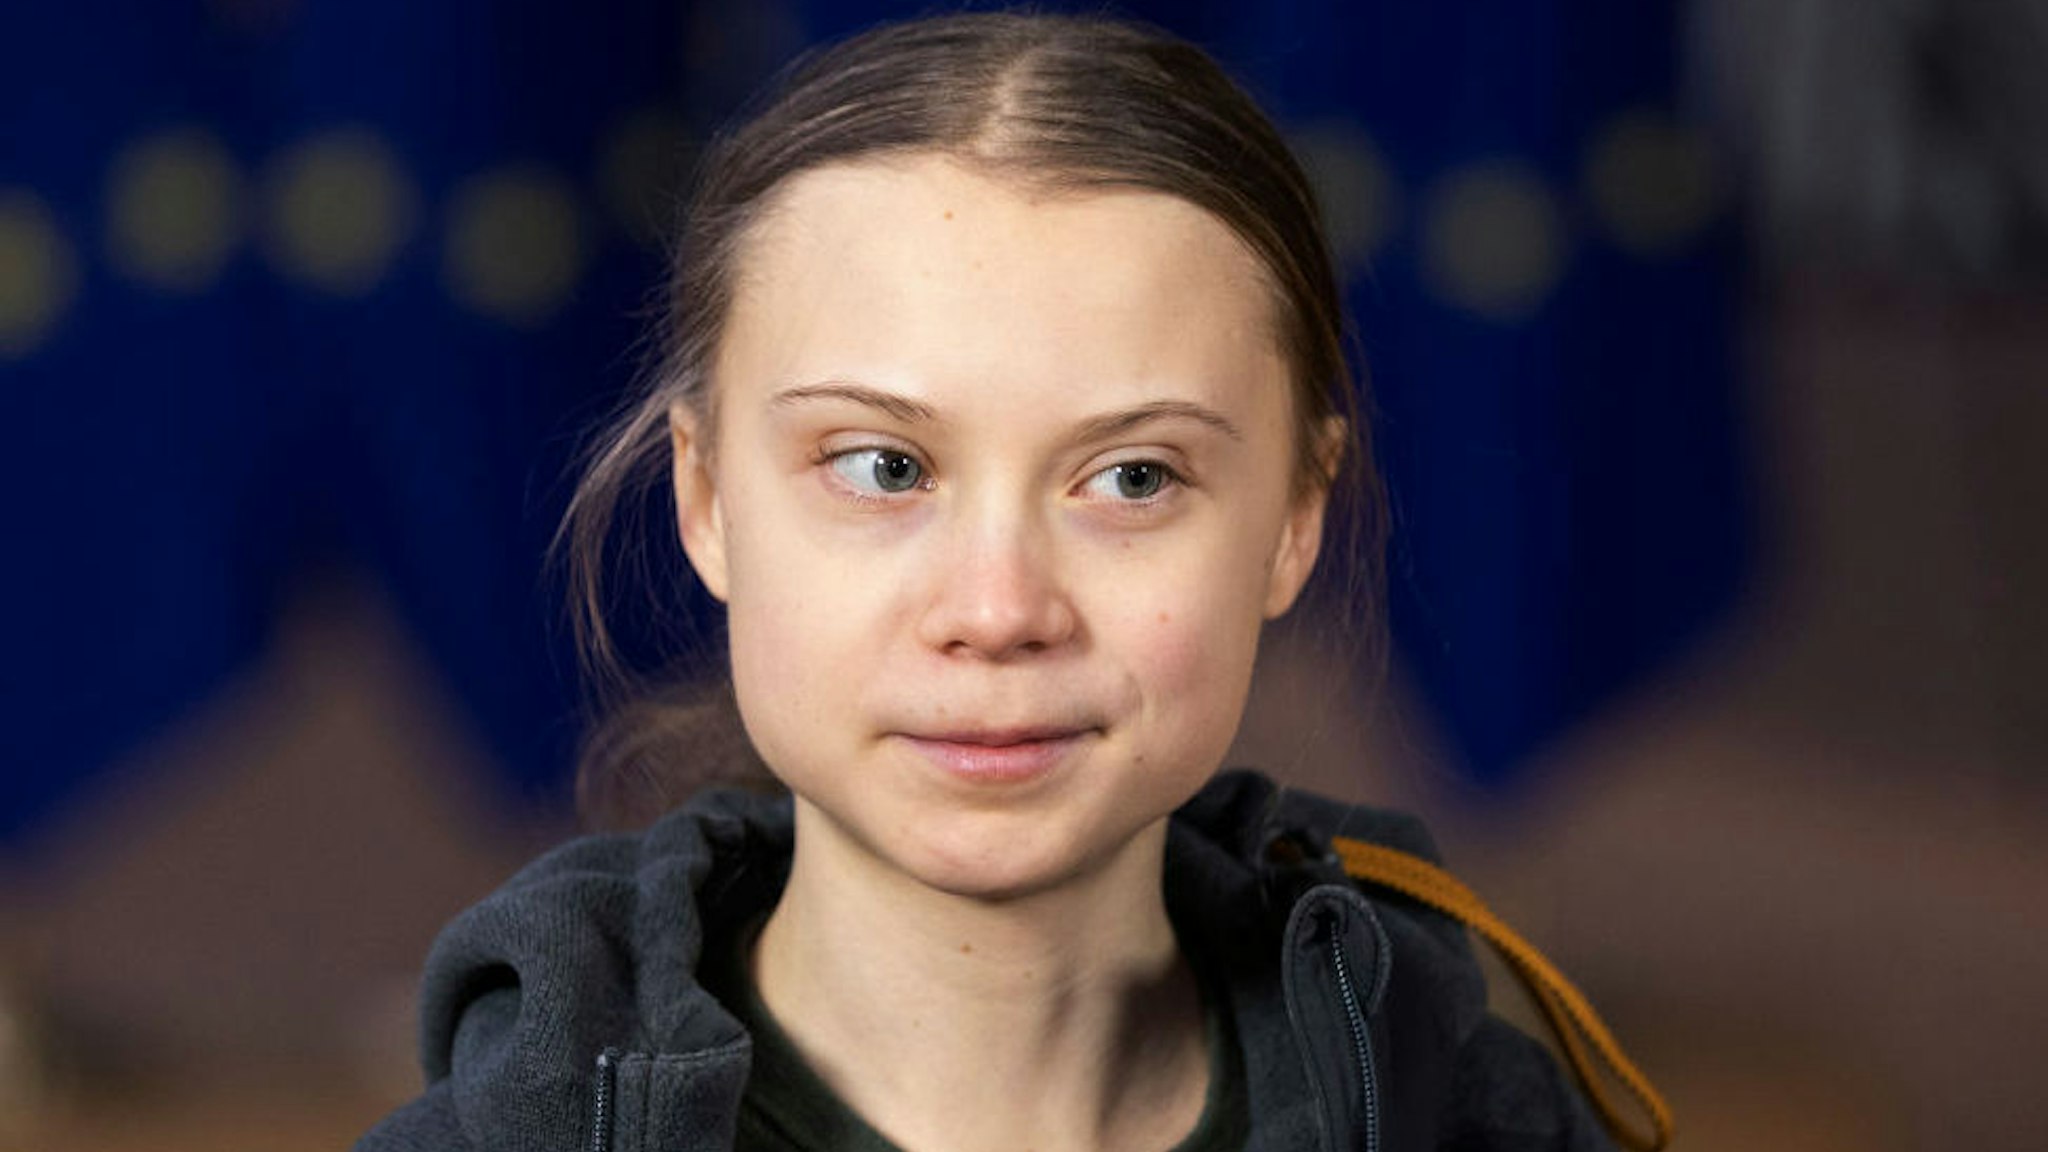 Swedish environmental activist on climate change Greta Thunberg is talking to media as she arrives for an EU environment Council at the Europa, the European Council headquarter, on March 5, 2020, in Brussels, Belgium.